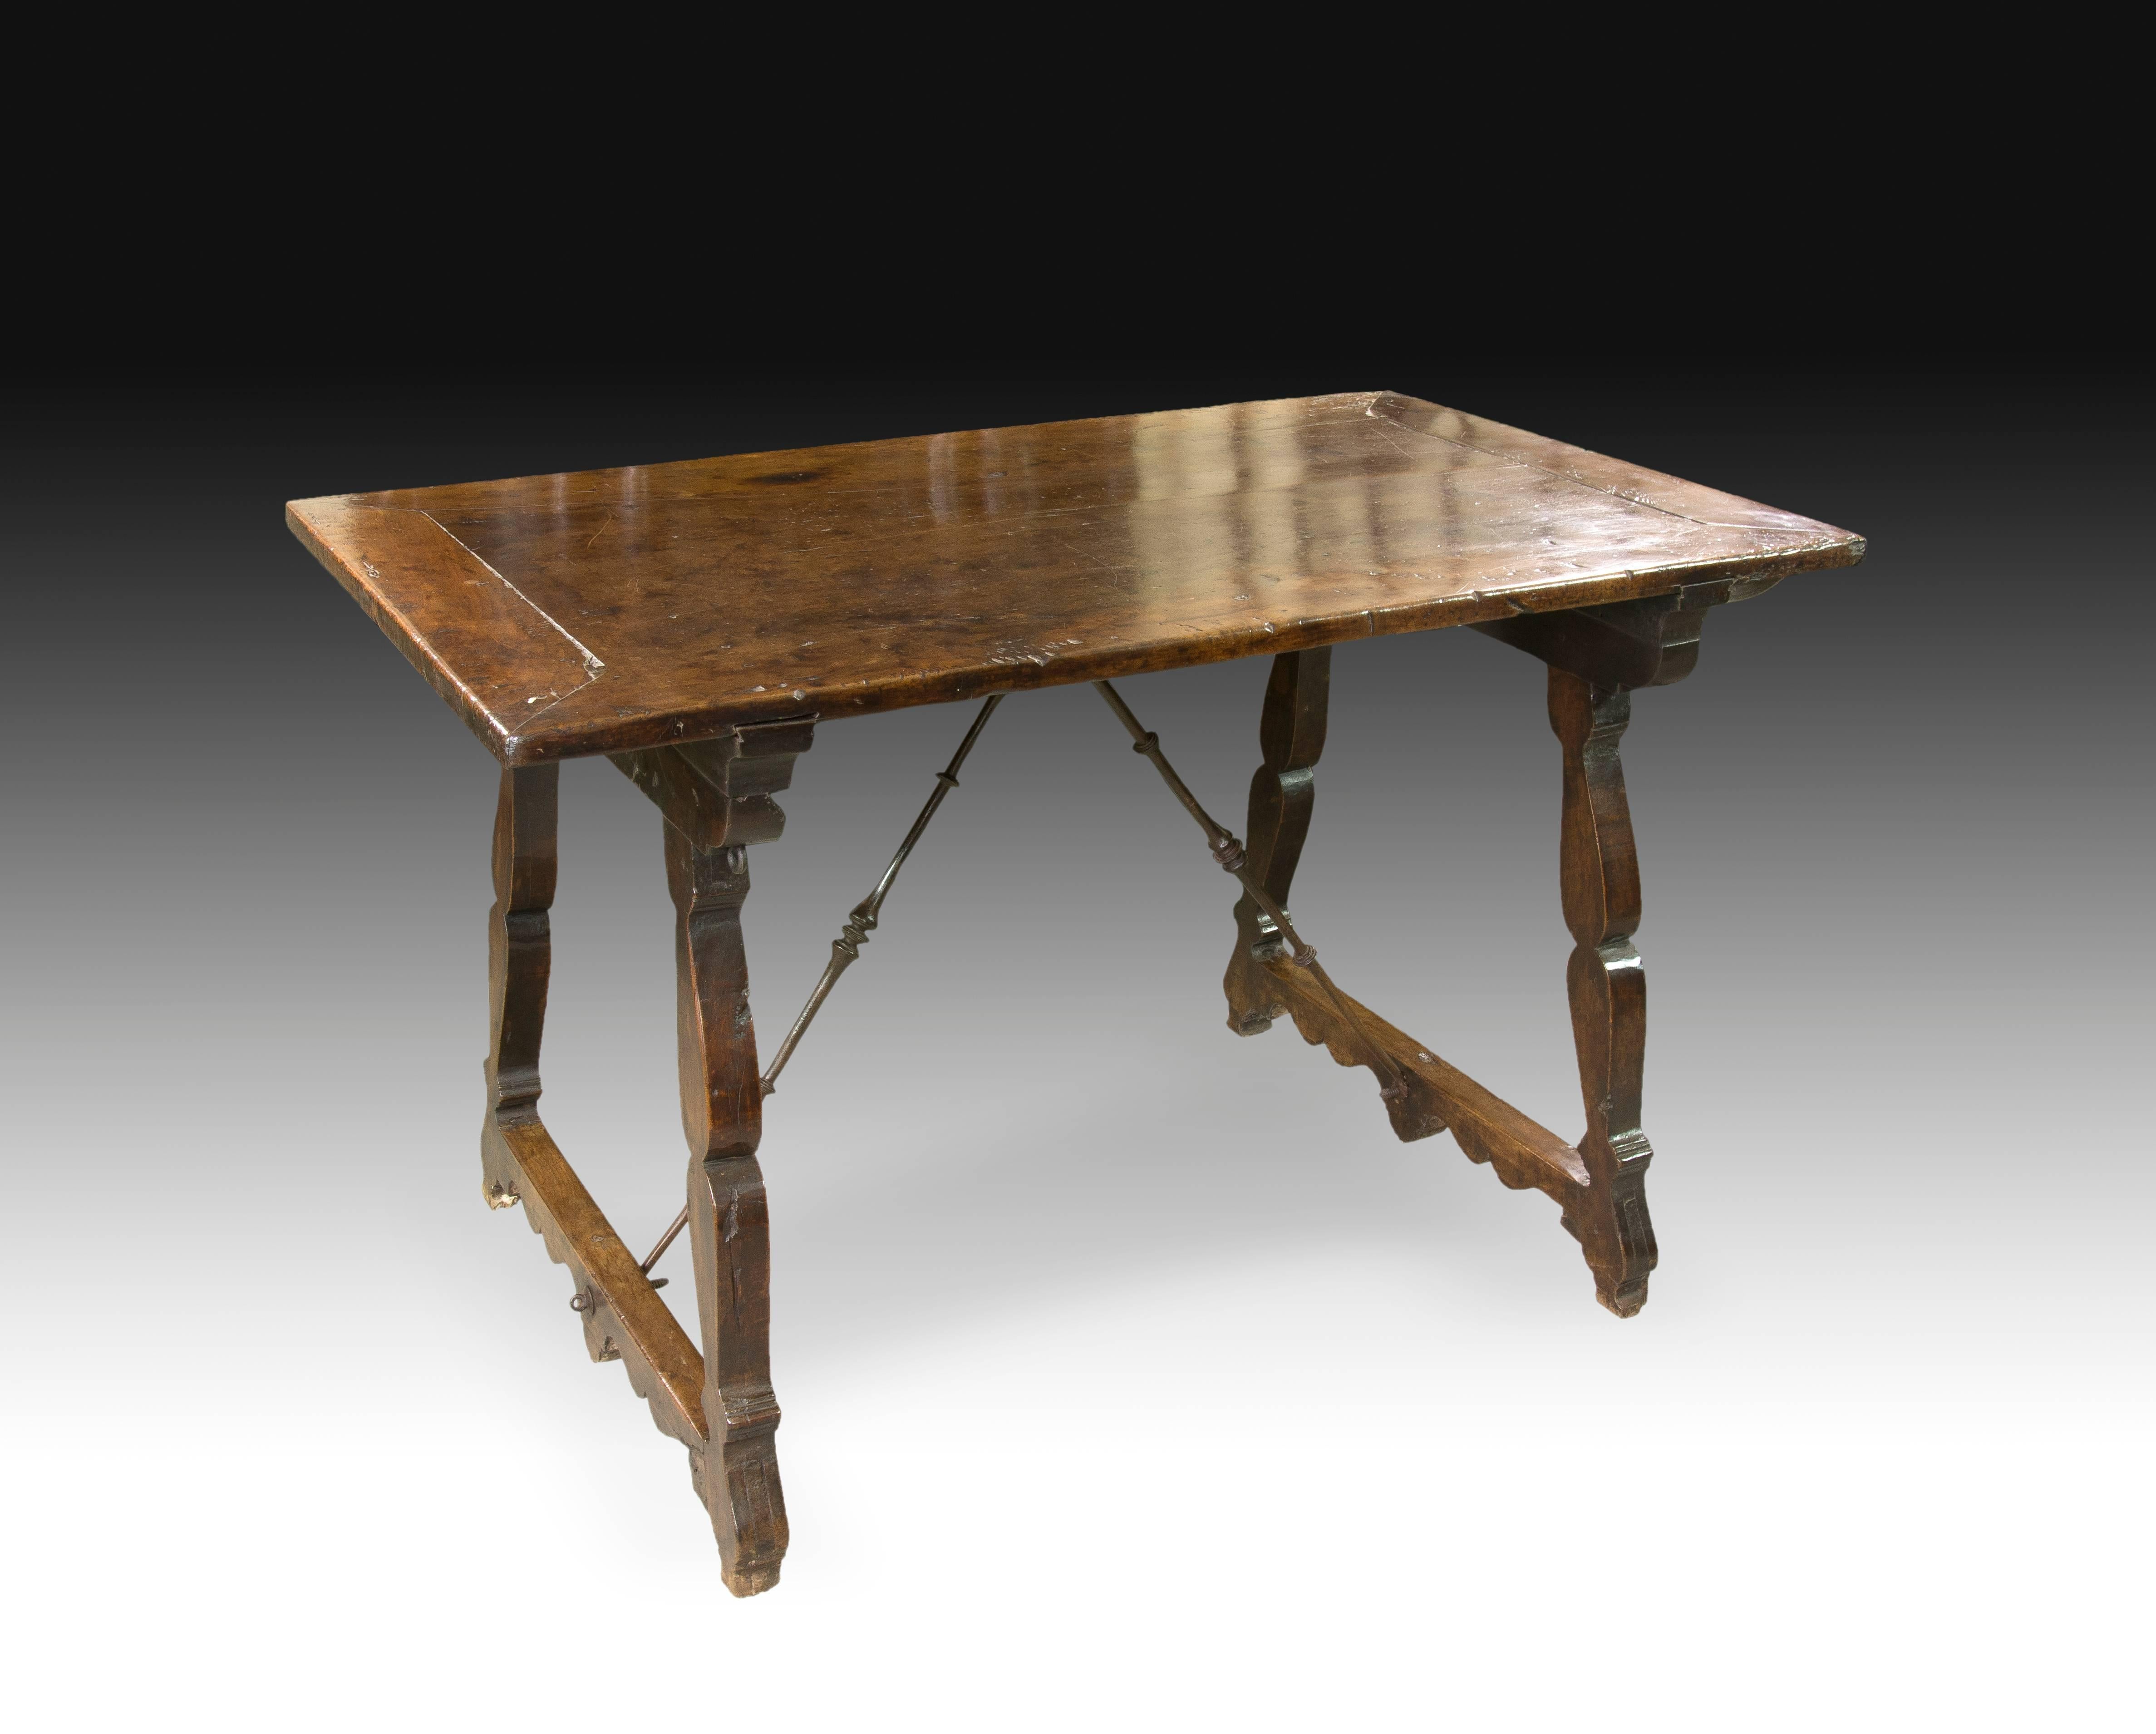 Baroque Walnut and Wrought Iron Table, Spain, 17th Century